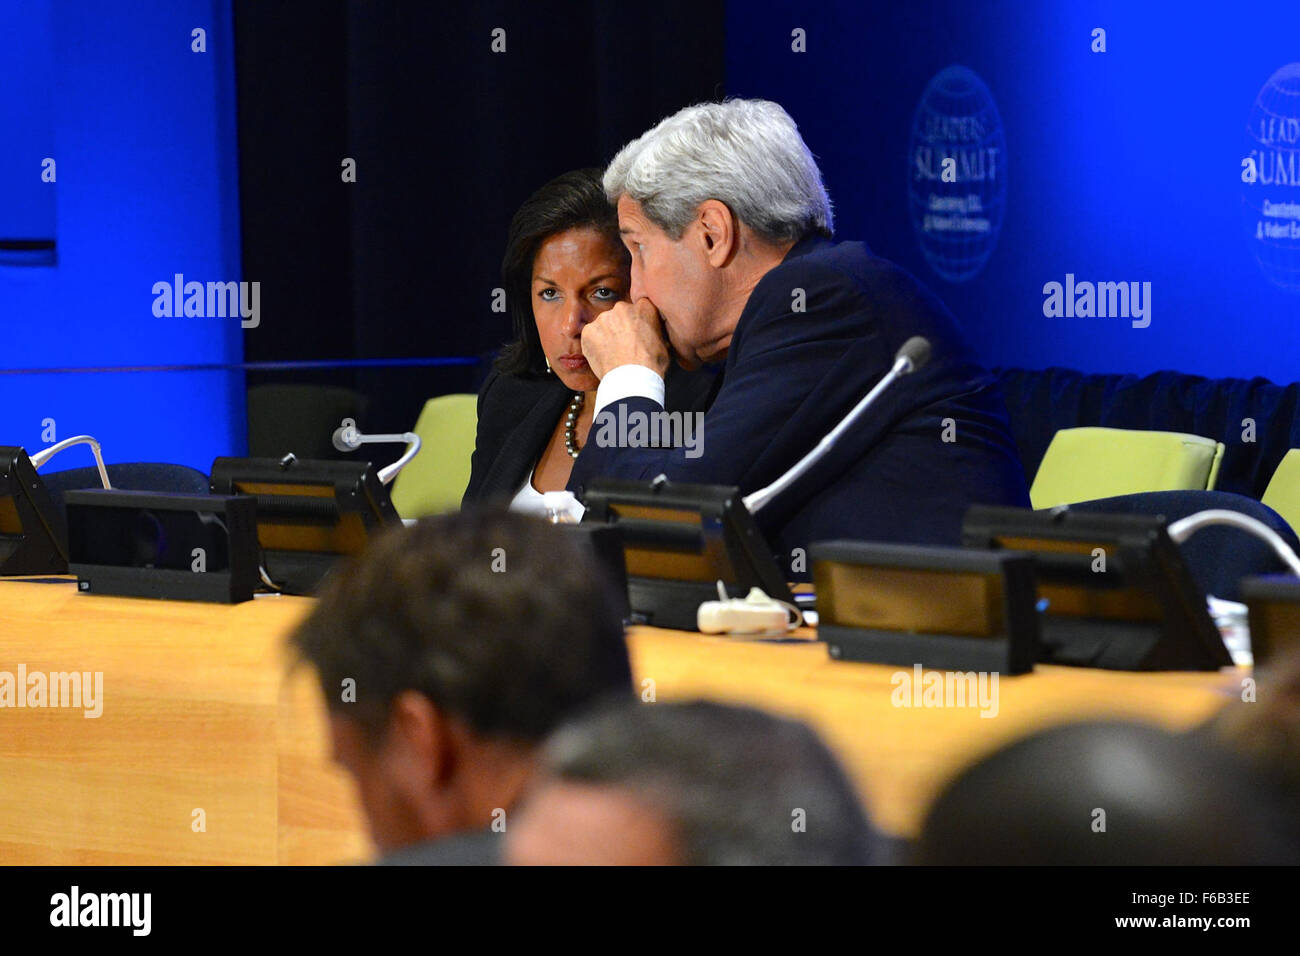 Secretary Kerry Chats With Ambassador Rice at the Leaders' Summit to Counter ISIL and Violent Extremism at UN Headquarters in New York City Stock Photo